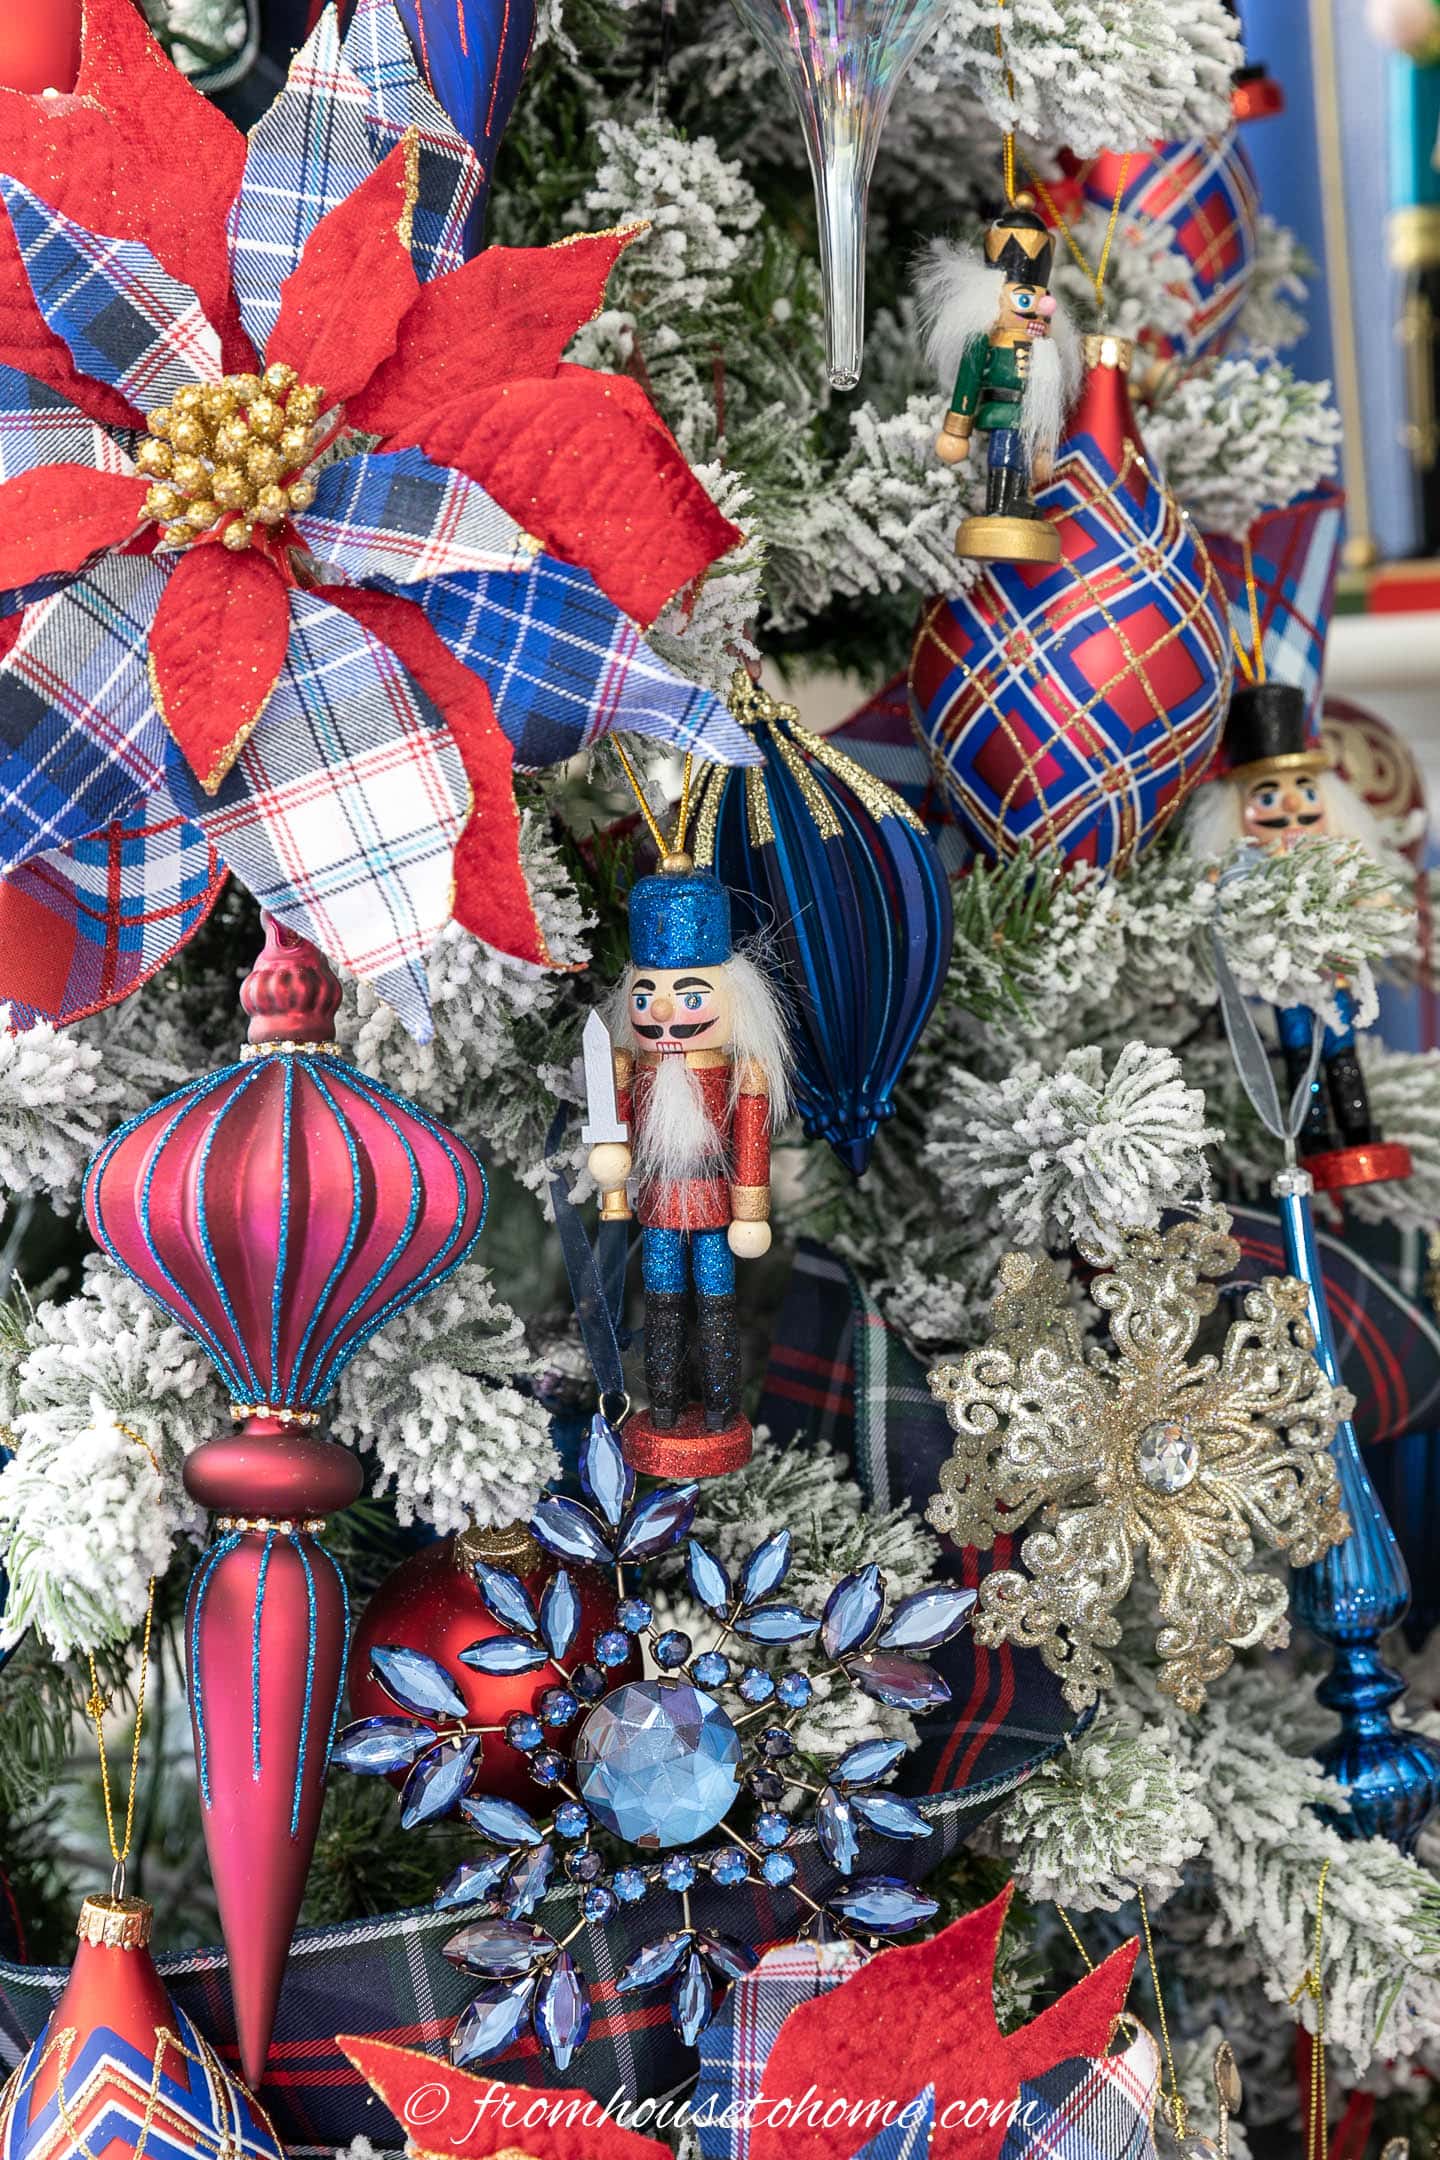 Nutcracker ornaments hung on a Christmas tree with red and blue ornaments